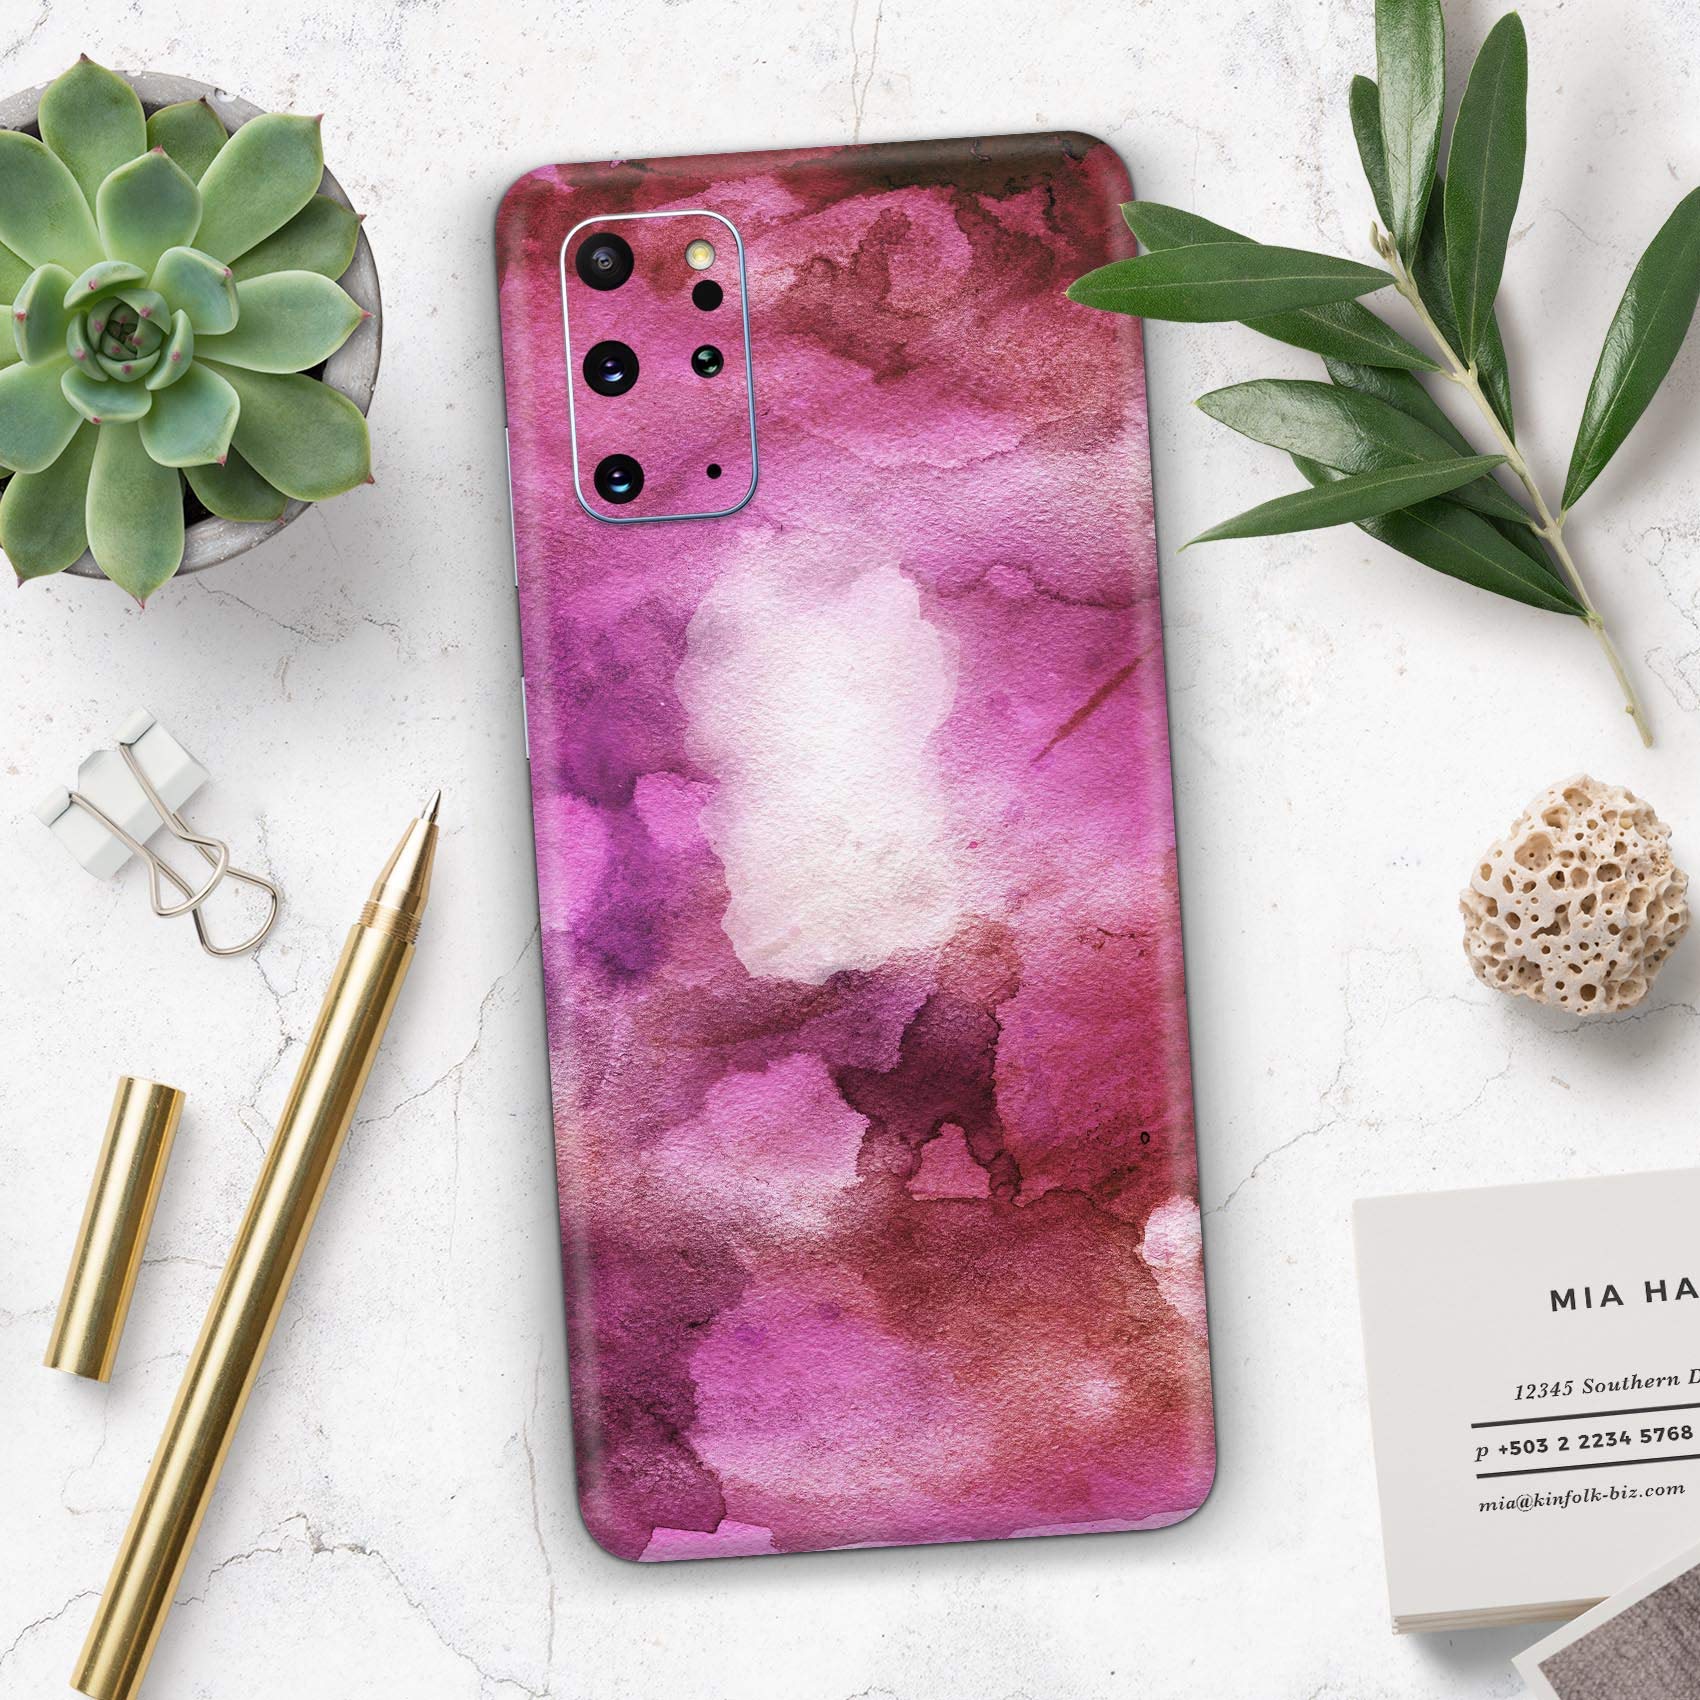 Design Skinz Pink 72 Absorbed Watercolor Texture | Protective Vinyl Decal Wrap Skin Cover Compatible with The Samsung Galaxy Note 8 (Full-Body, Screen Trim & Back Glass Skin)